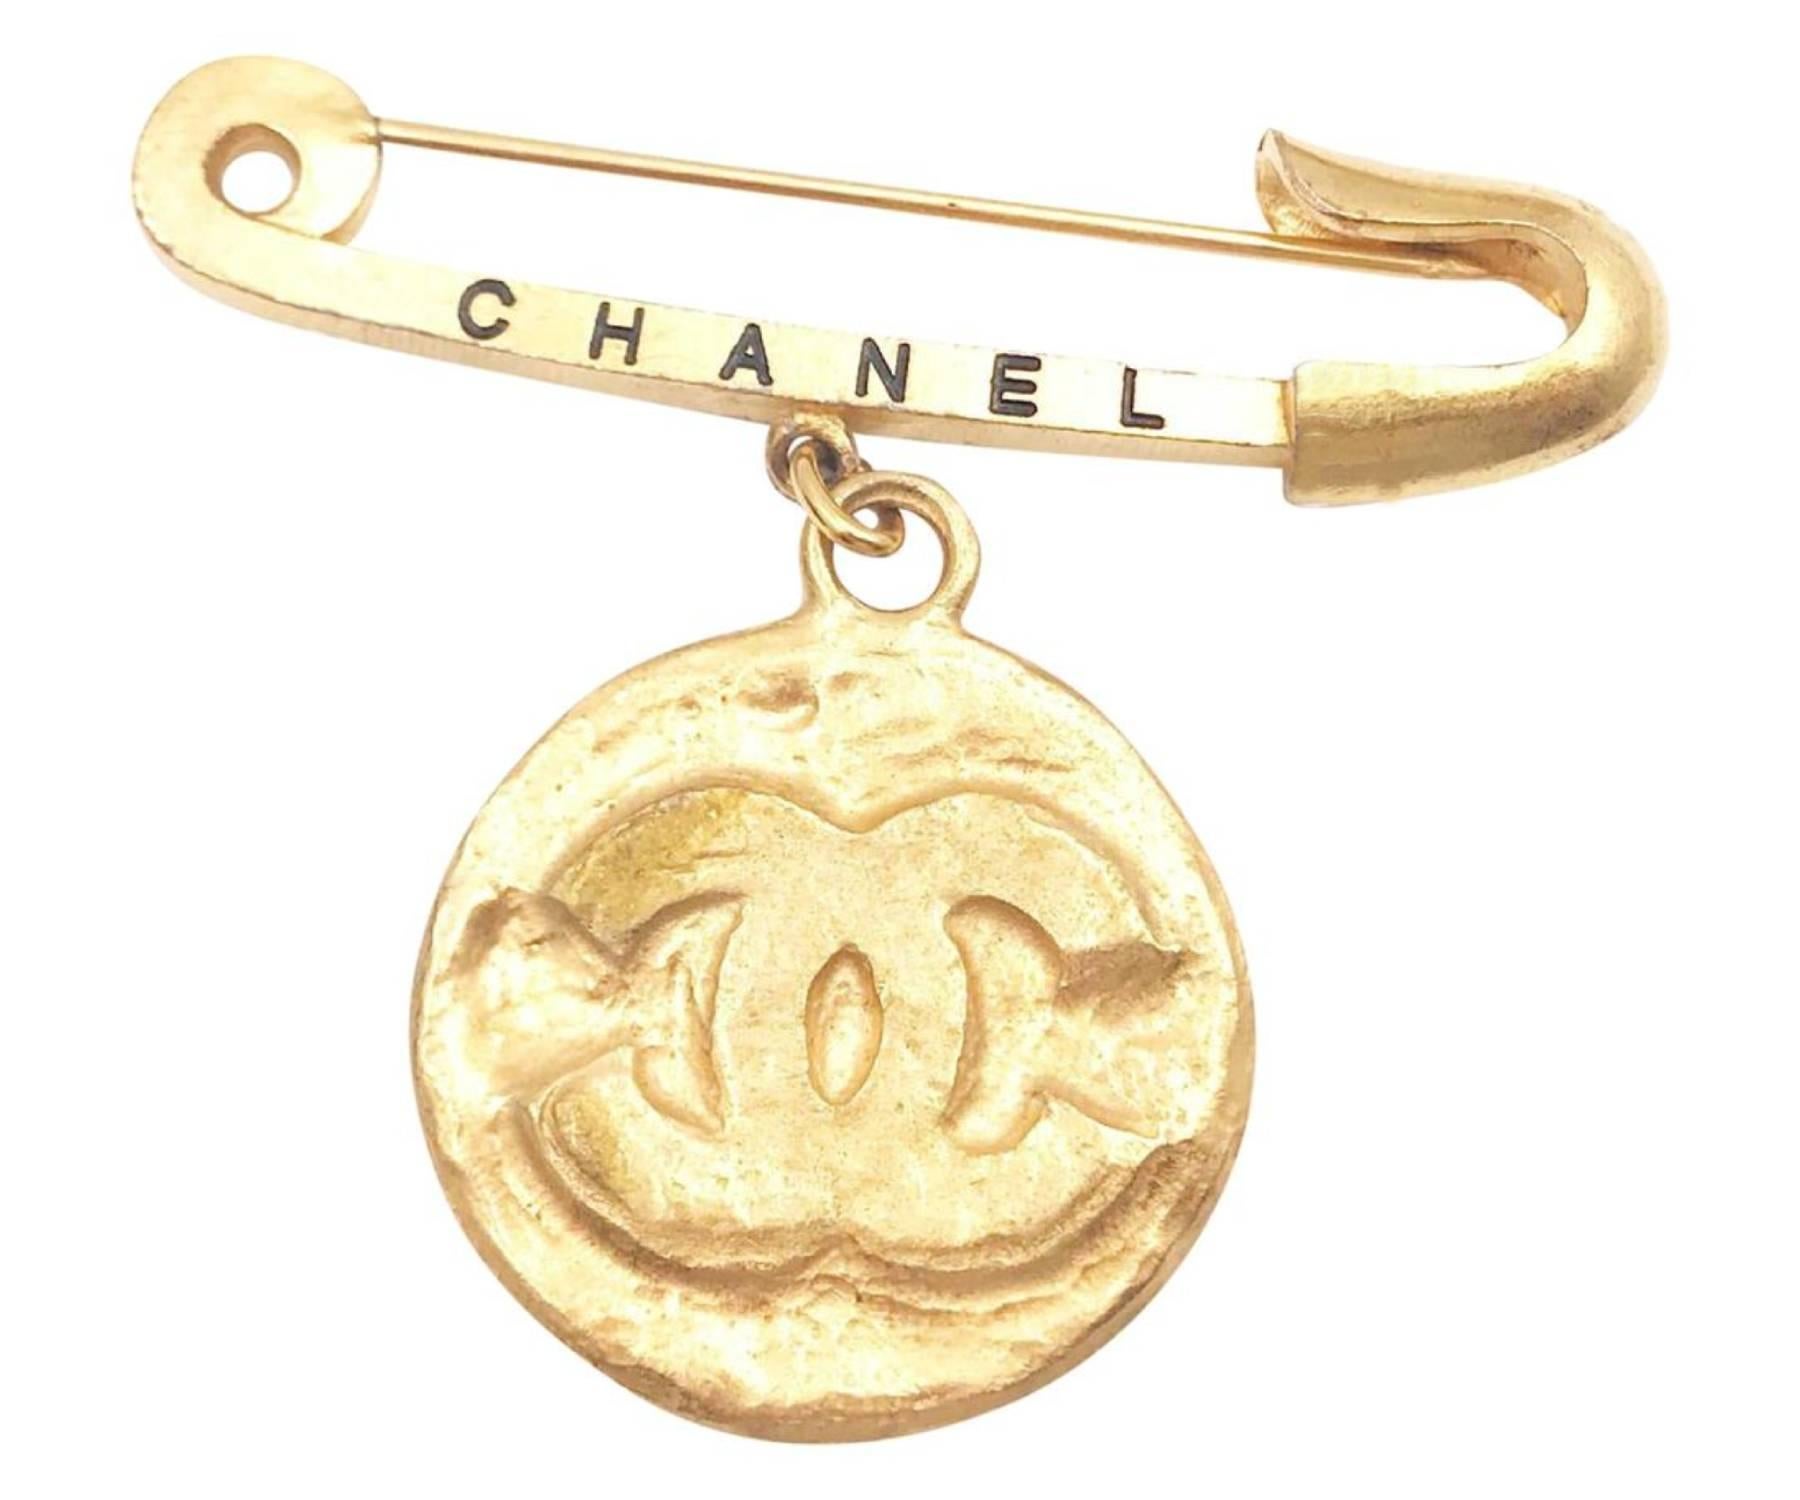 Chanel Vintage Gold Plated Medallion Coin Safety Pin Brooch

* Marked 94
* Made in France
* Comes with the original box

-Approximately 3.5″ x 2.75″
-Very classic
-In an excellent vintage condition

AB5914-00355

